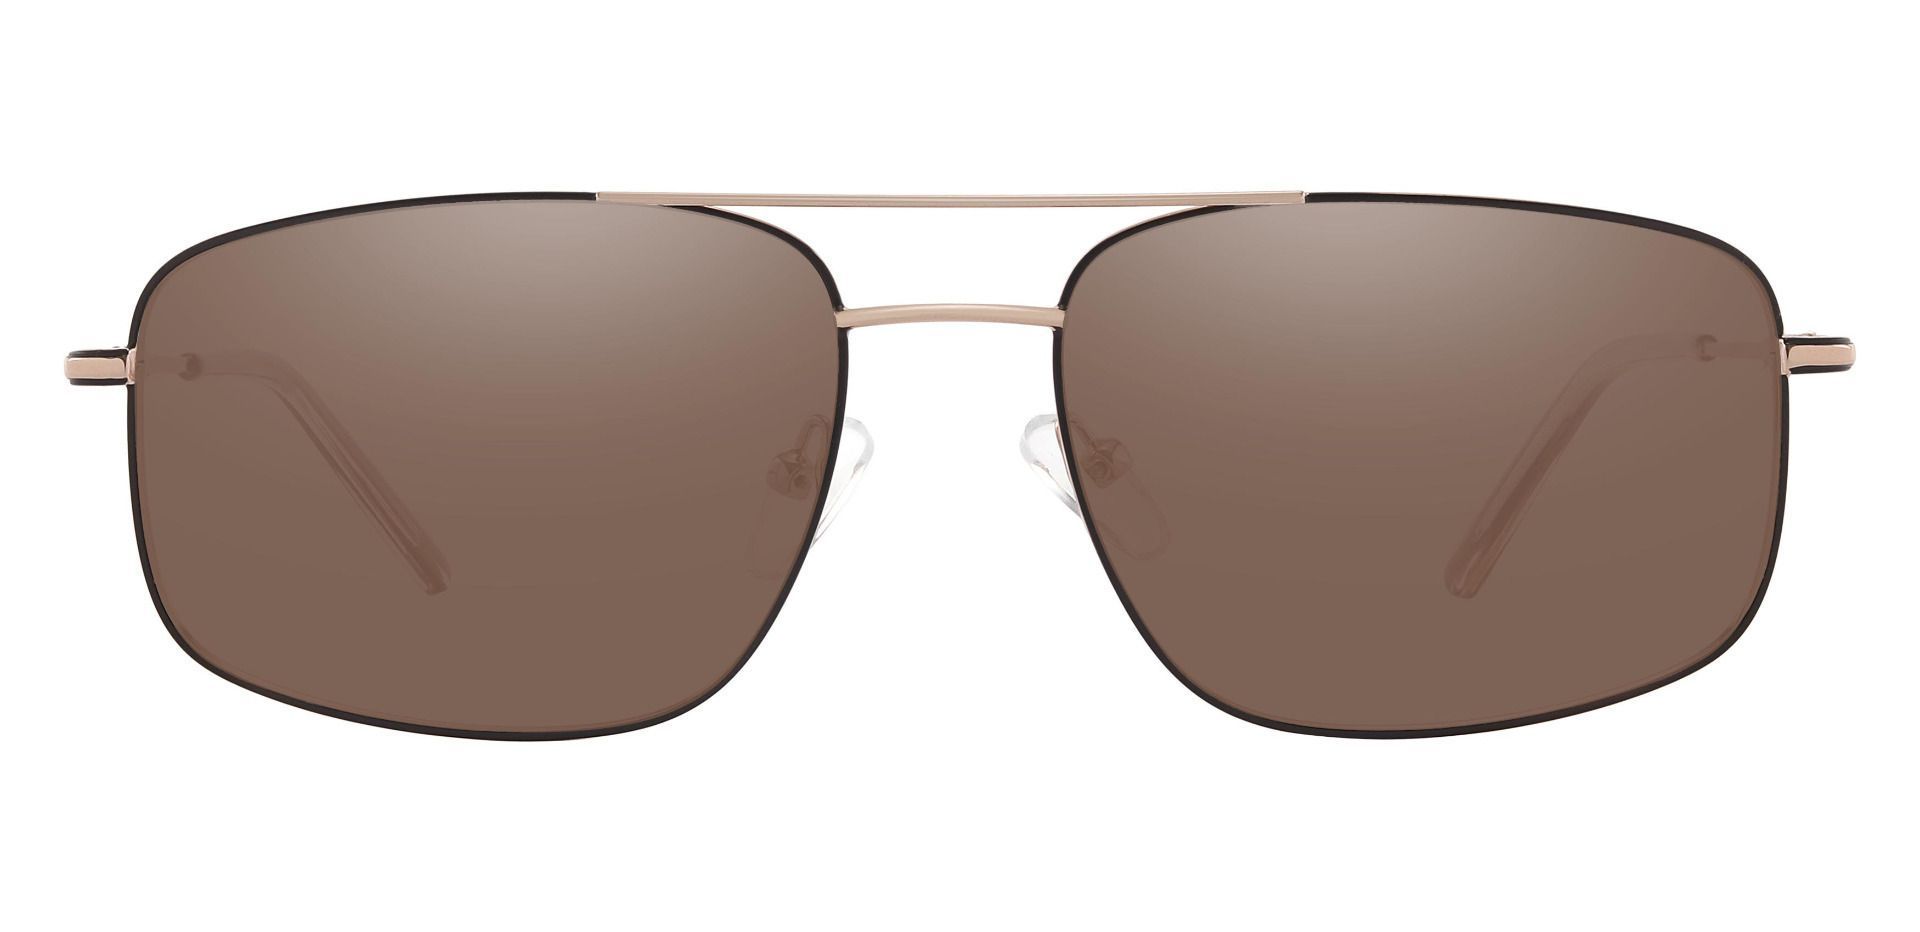 Turner Aviator Non-Rx Sunglasses - Gold Frame With Brown Lenses